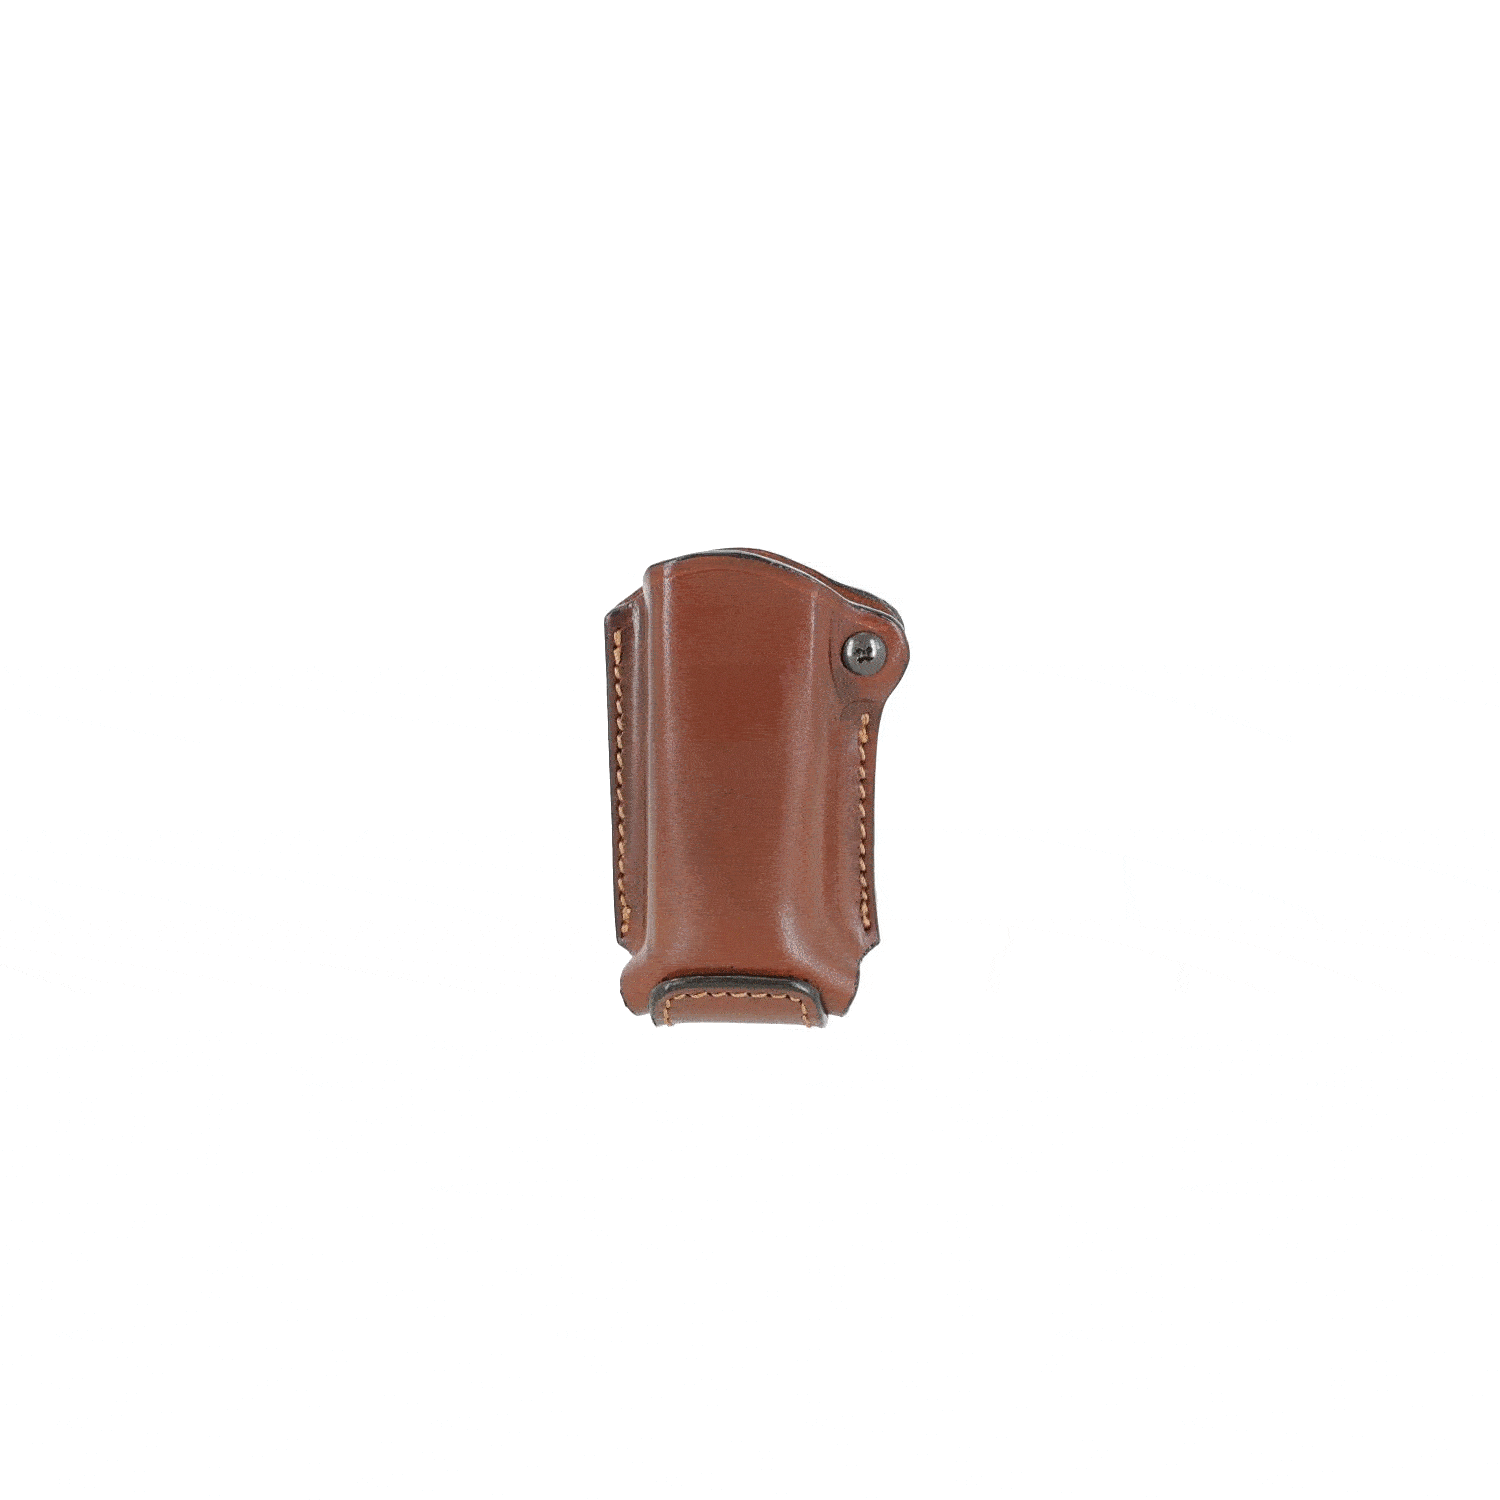 Single magazine open top pouch with retention screw